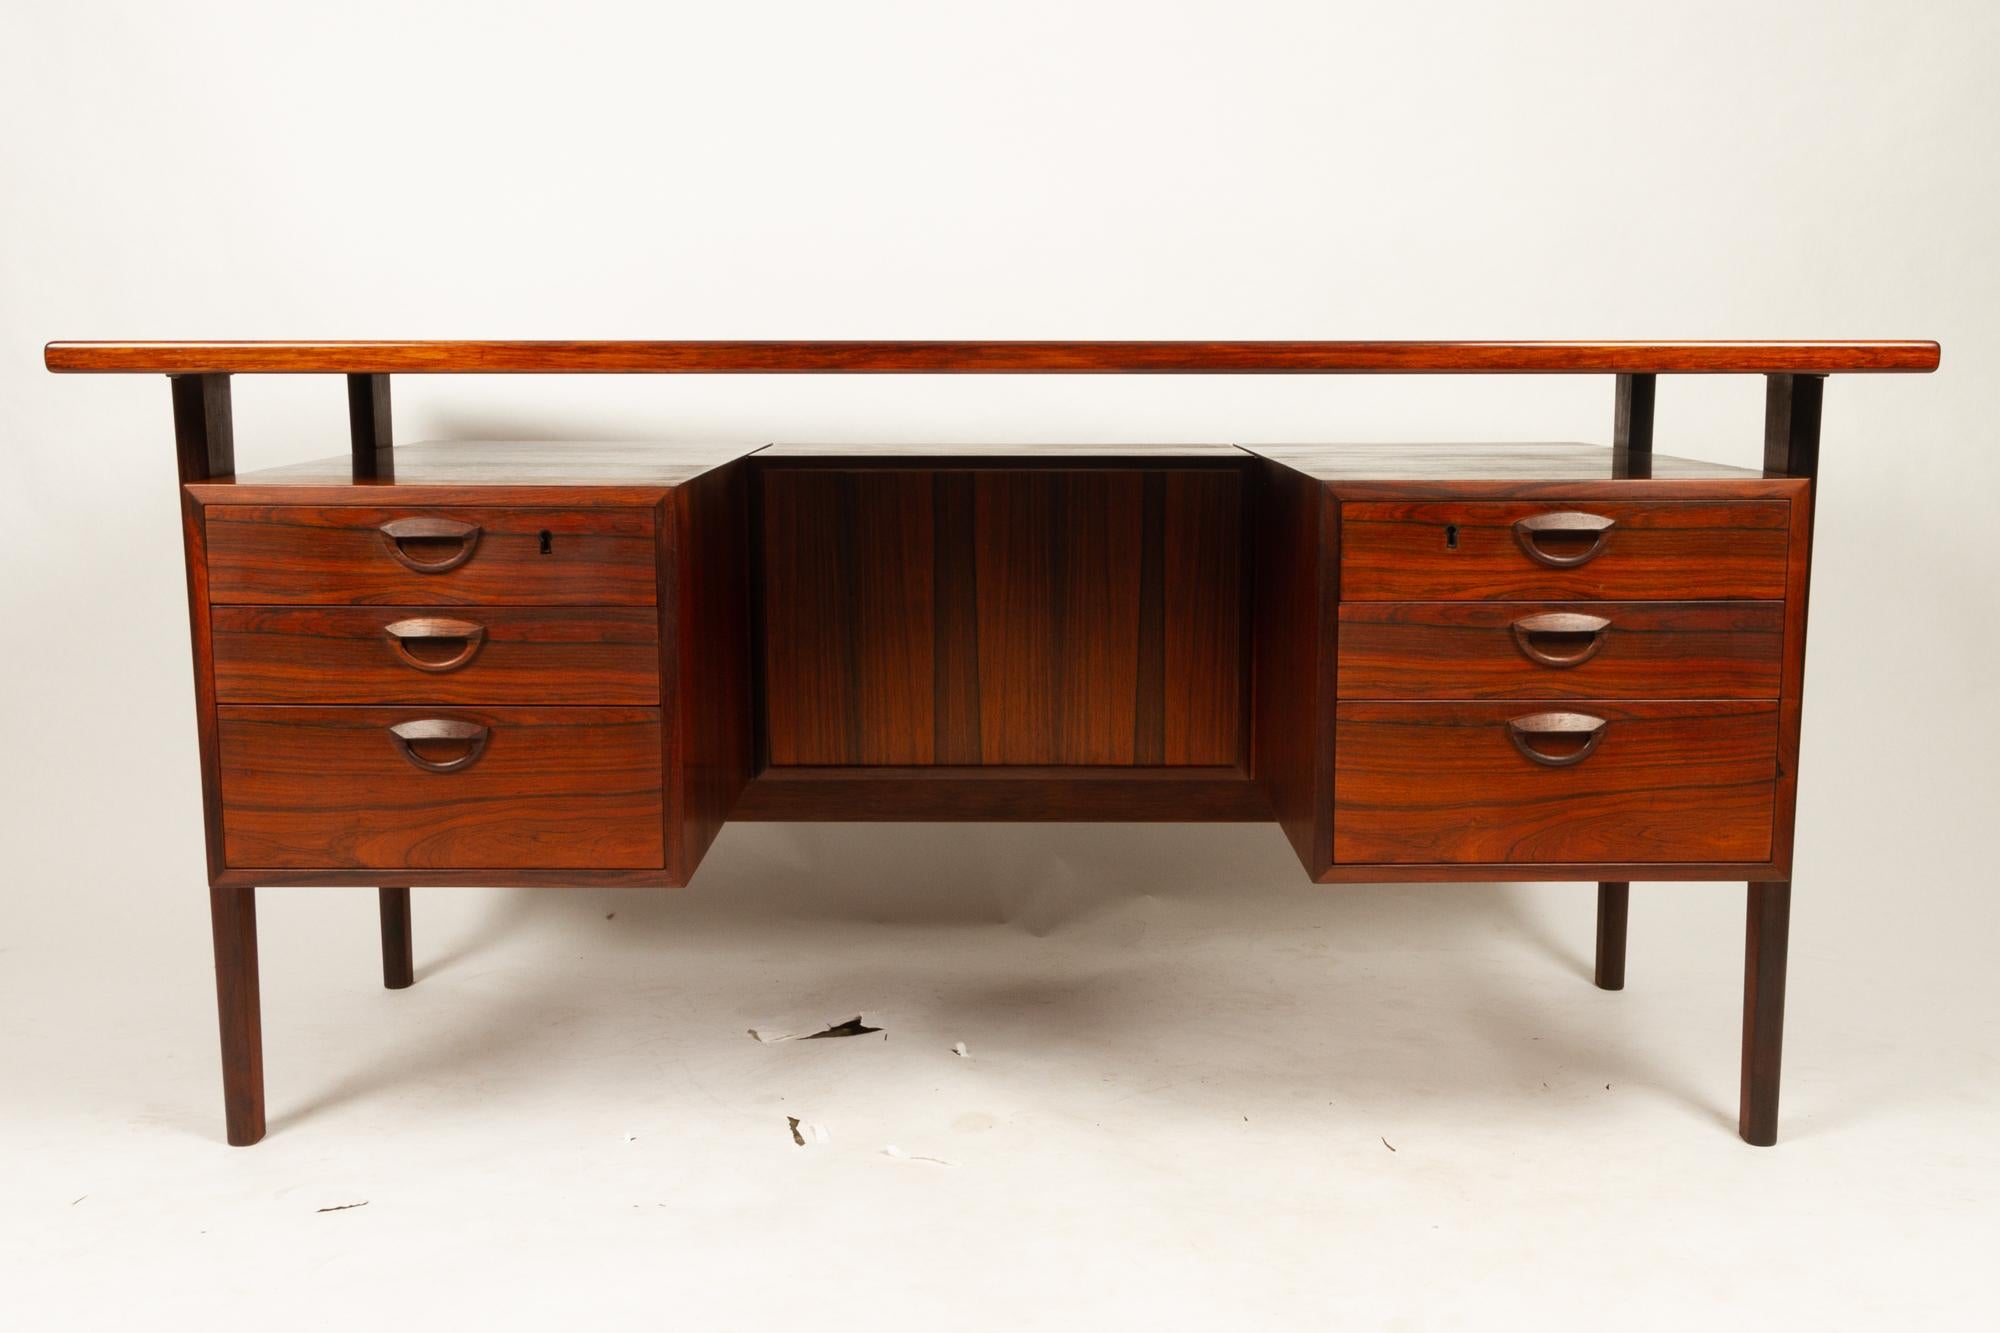 Danish vintage rosewood desk by Kai Kristiansen for Feldballe Møbelfabrik, 1960s.
The classic and iconic Model FM 60 executive desk in Rosewood by Danish designer Kai Kristiansen.
Freestanding desk with floating desktop. Two drawer sections with